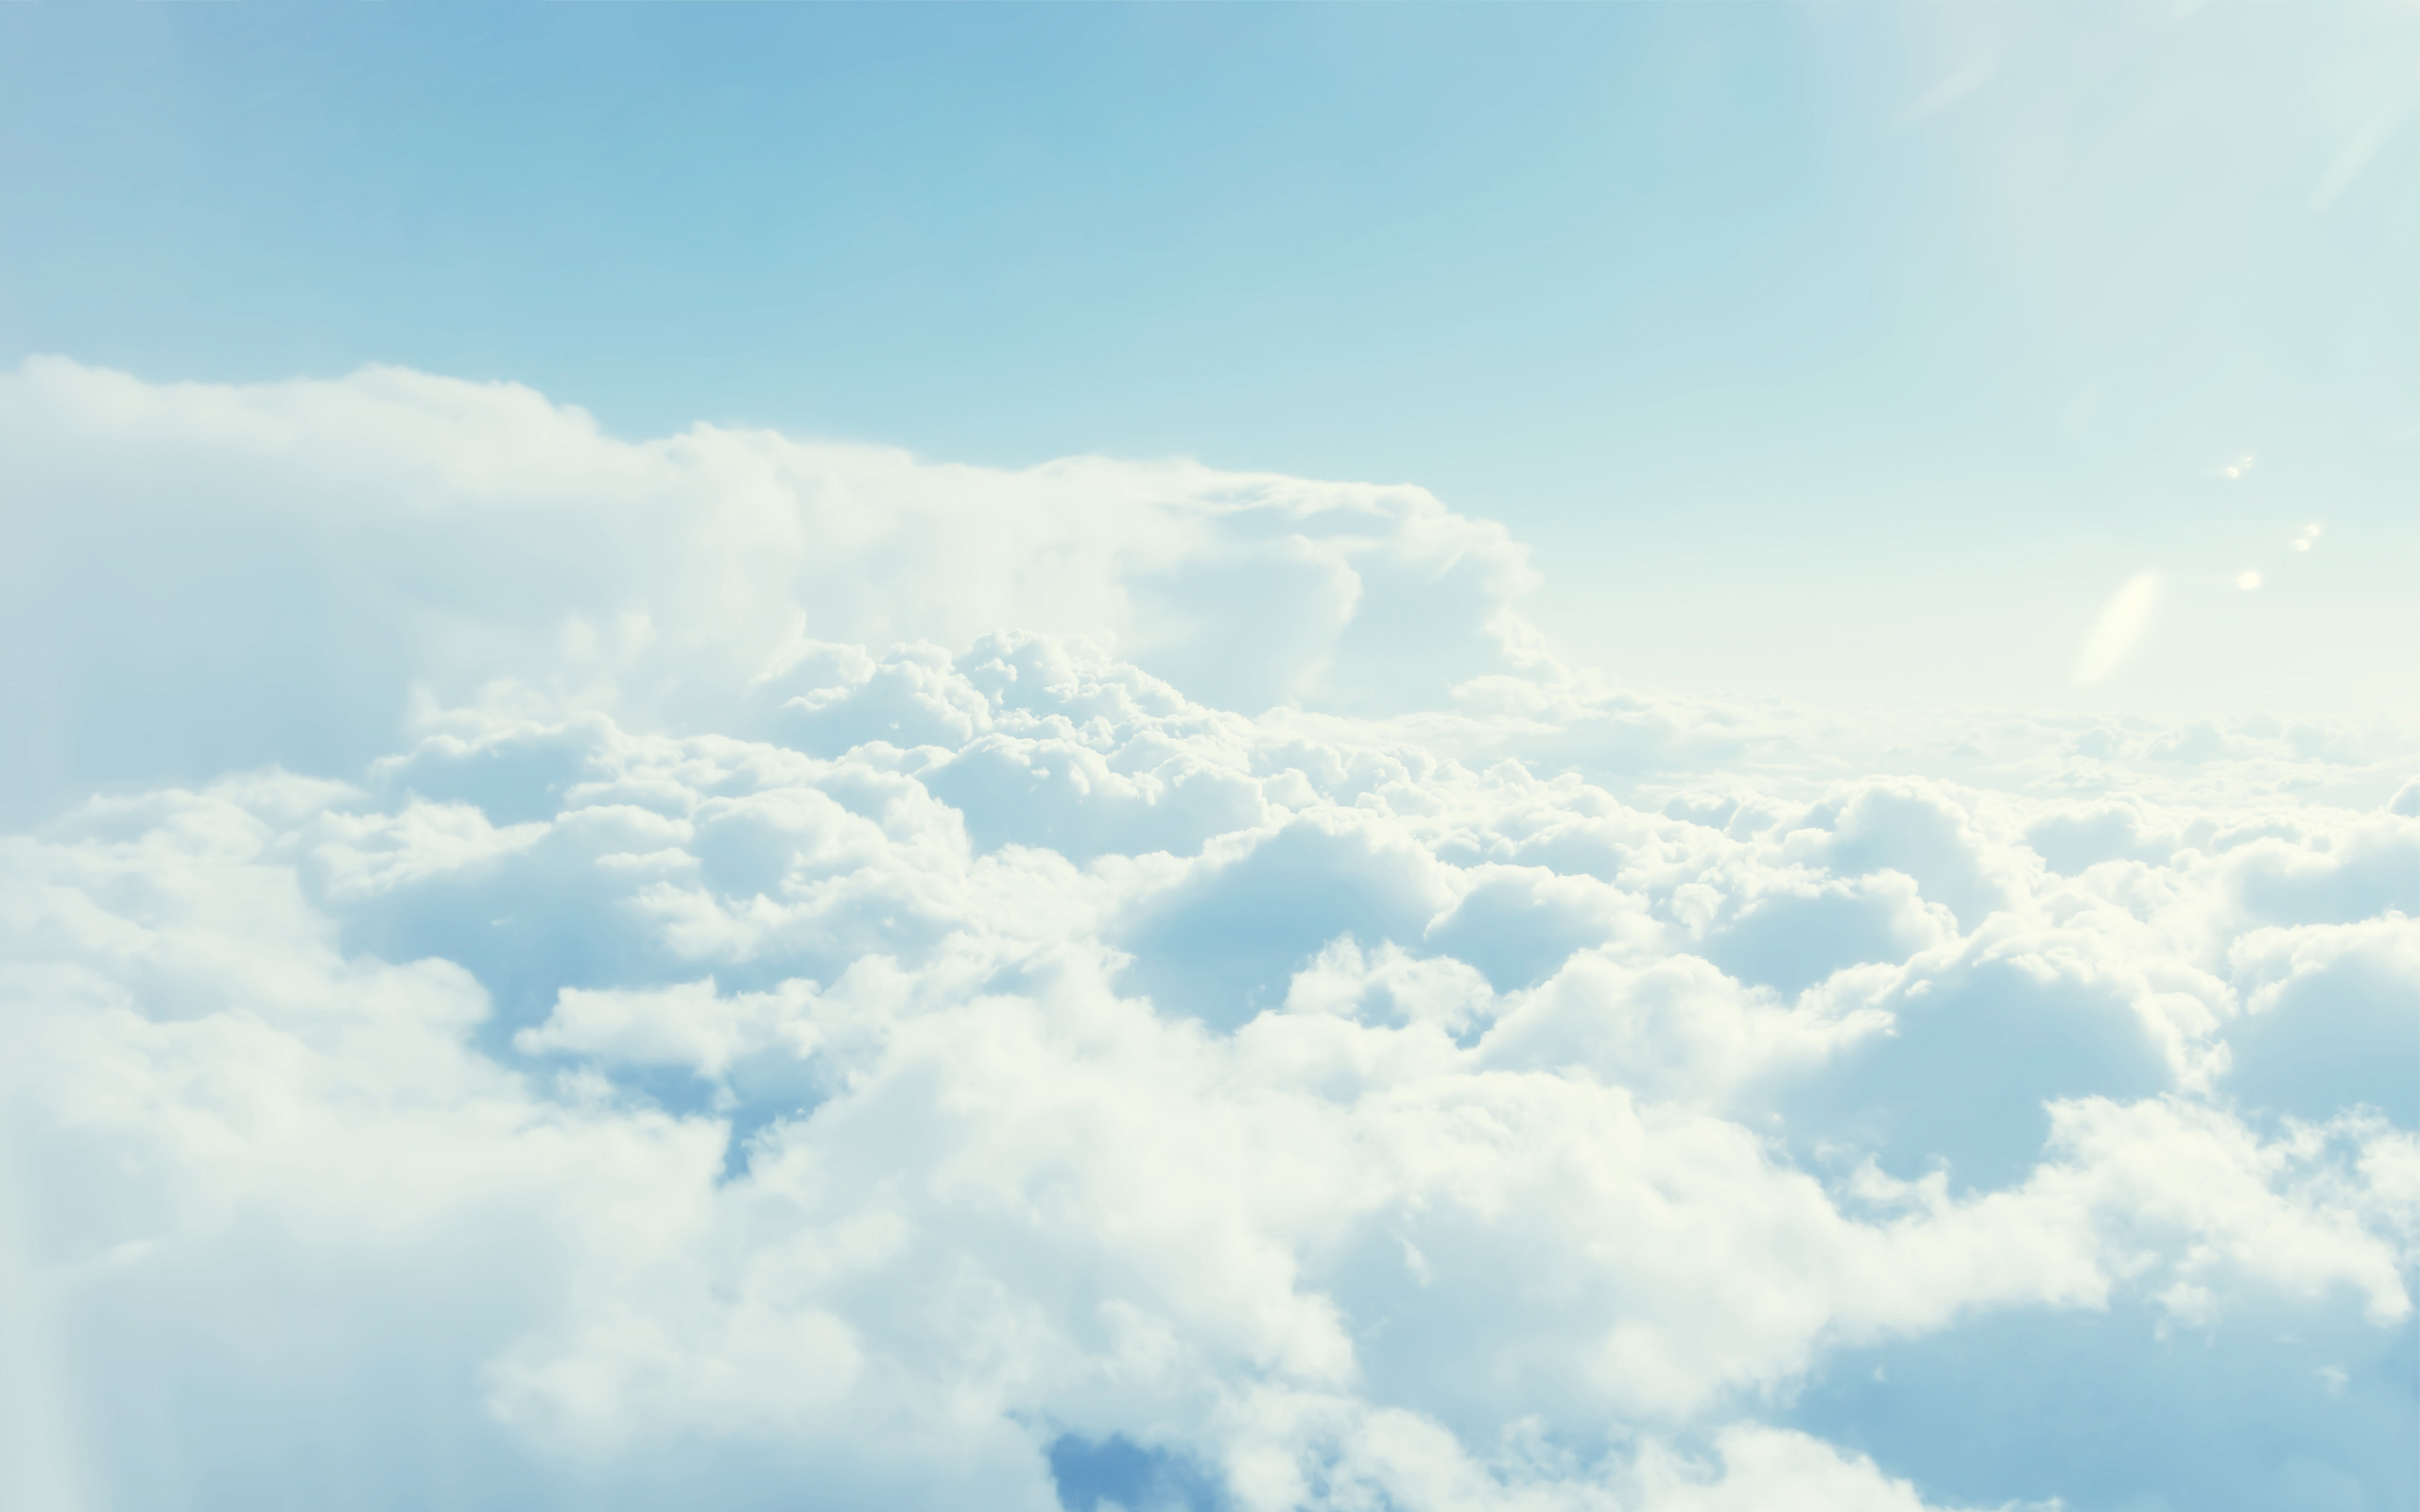 Above the Clouds wallpapers and images   download wallpapers 2560x1600